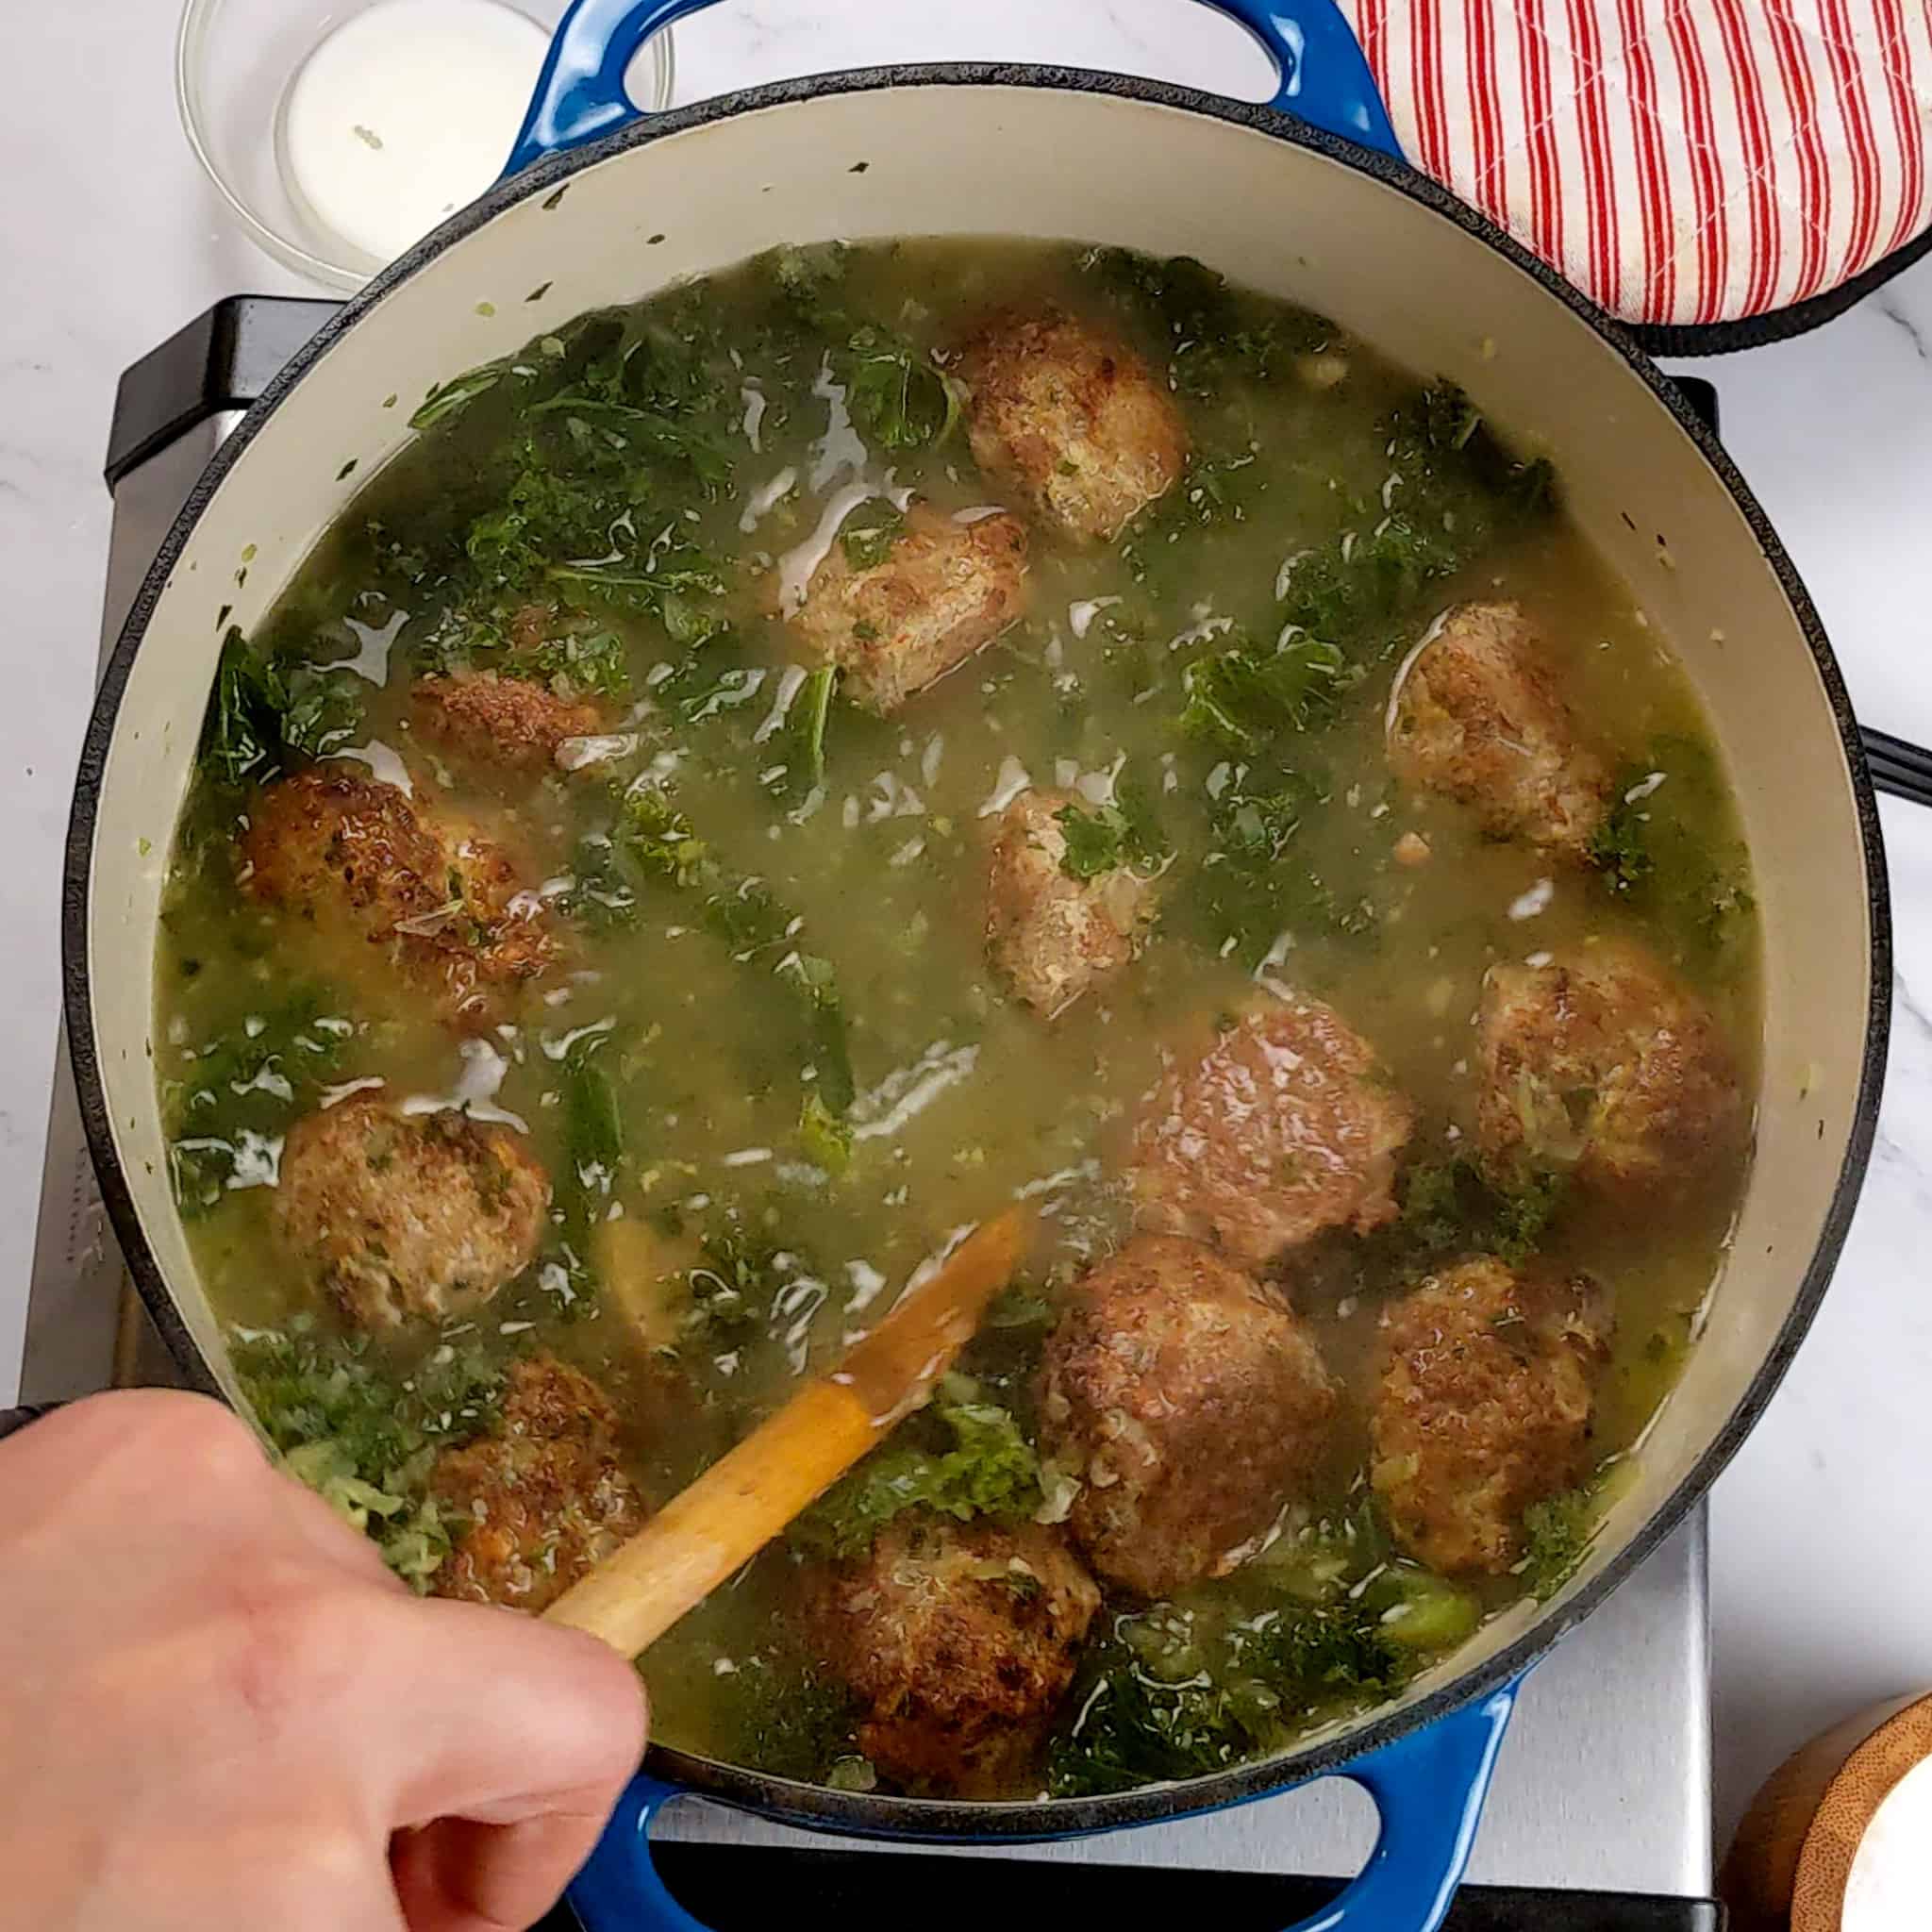 meatballs in a kale broth being stirred with a wooden spoon for the Easy and Healthy Spicy Turkey Meatball Kale Soup